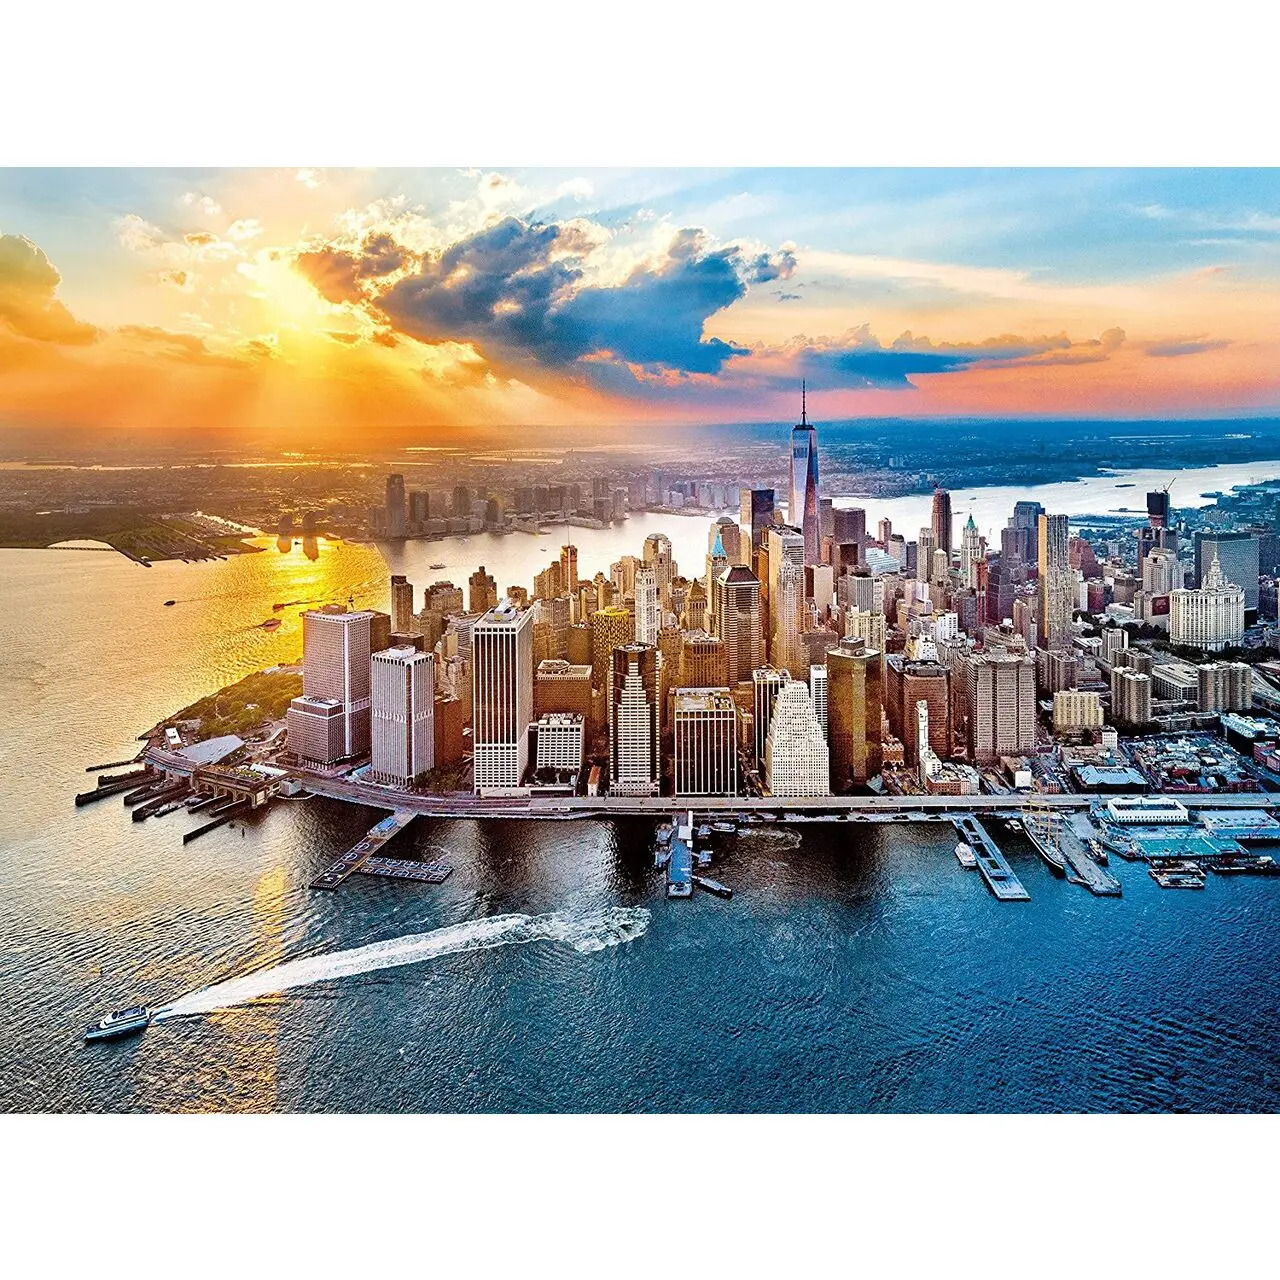 New Puzzle York Teile 500